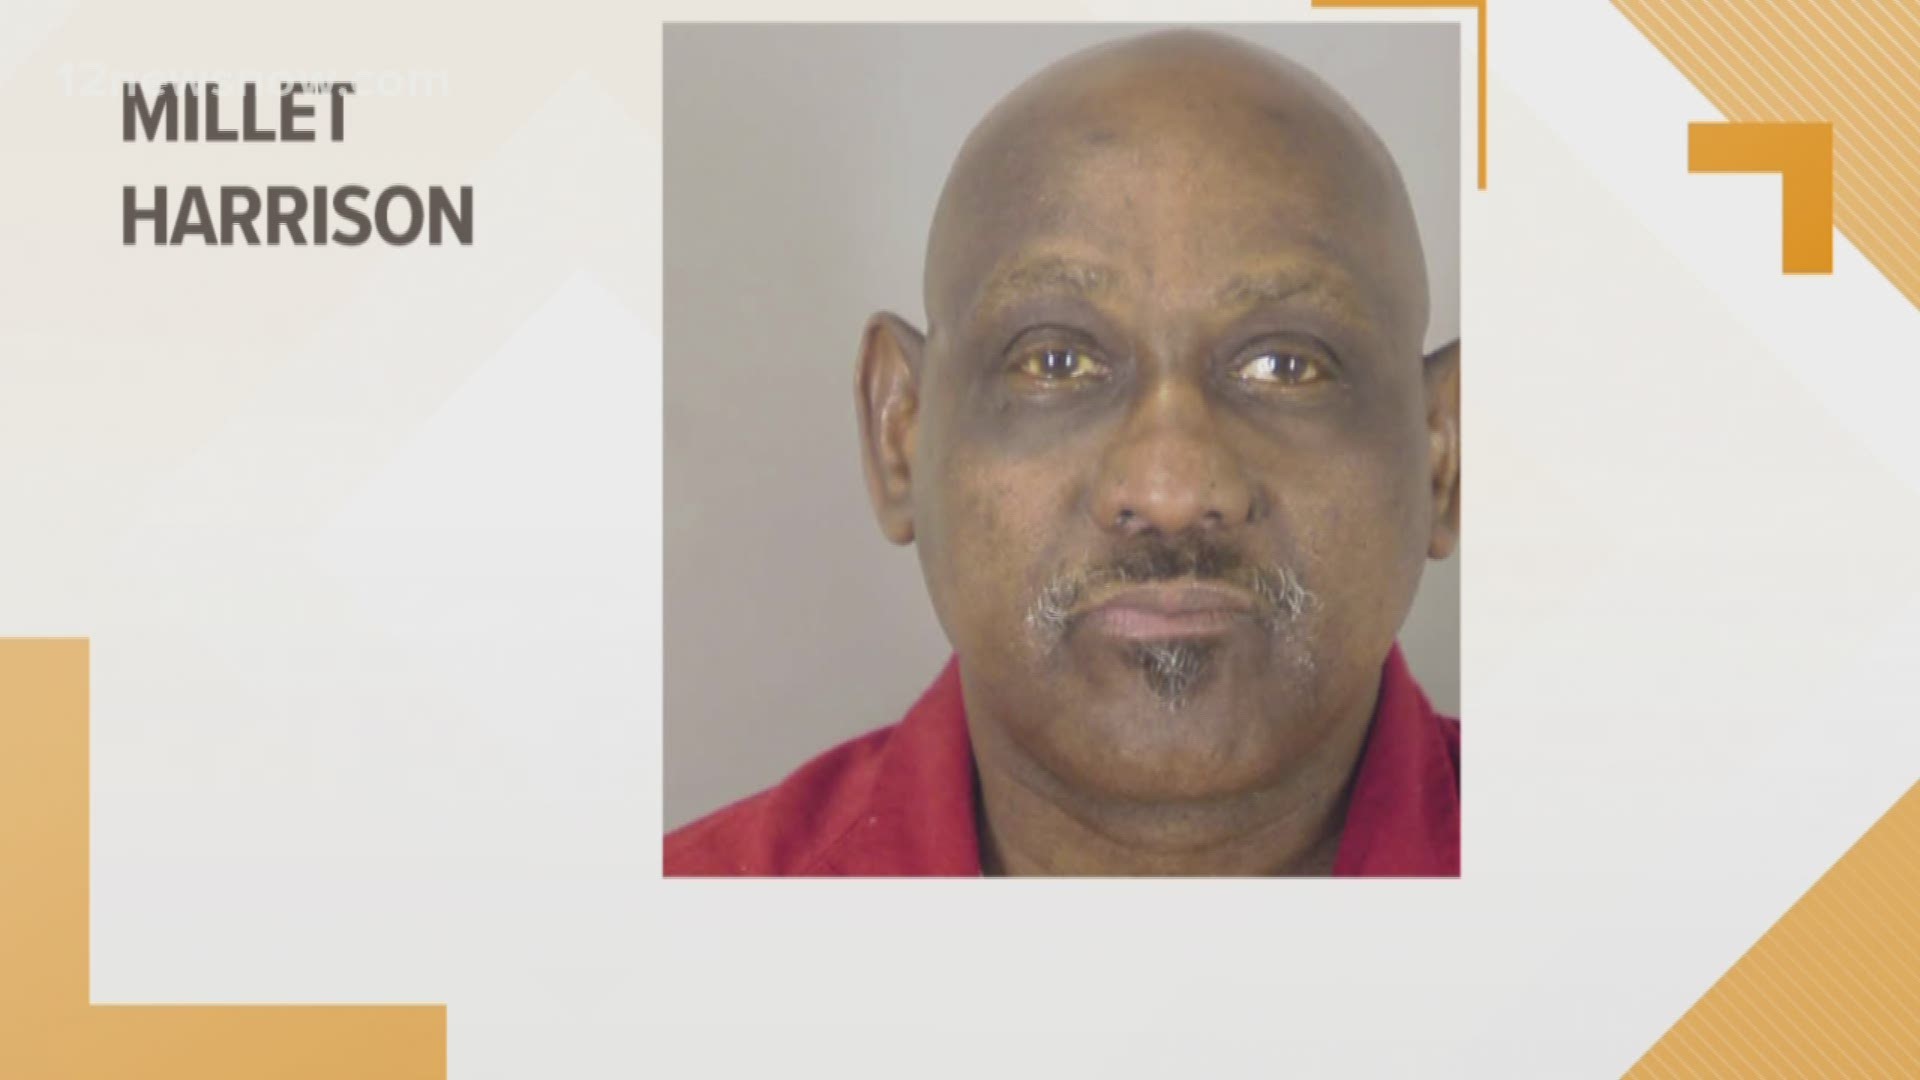 Law enforcement in Leon County, Texas, confirmed to 12News Millet Harrison is in custody after an arrest warrant was issued on Tuesday.